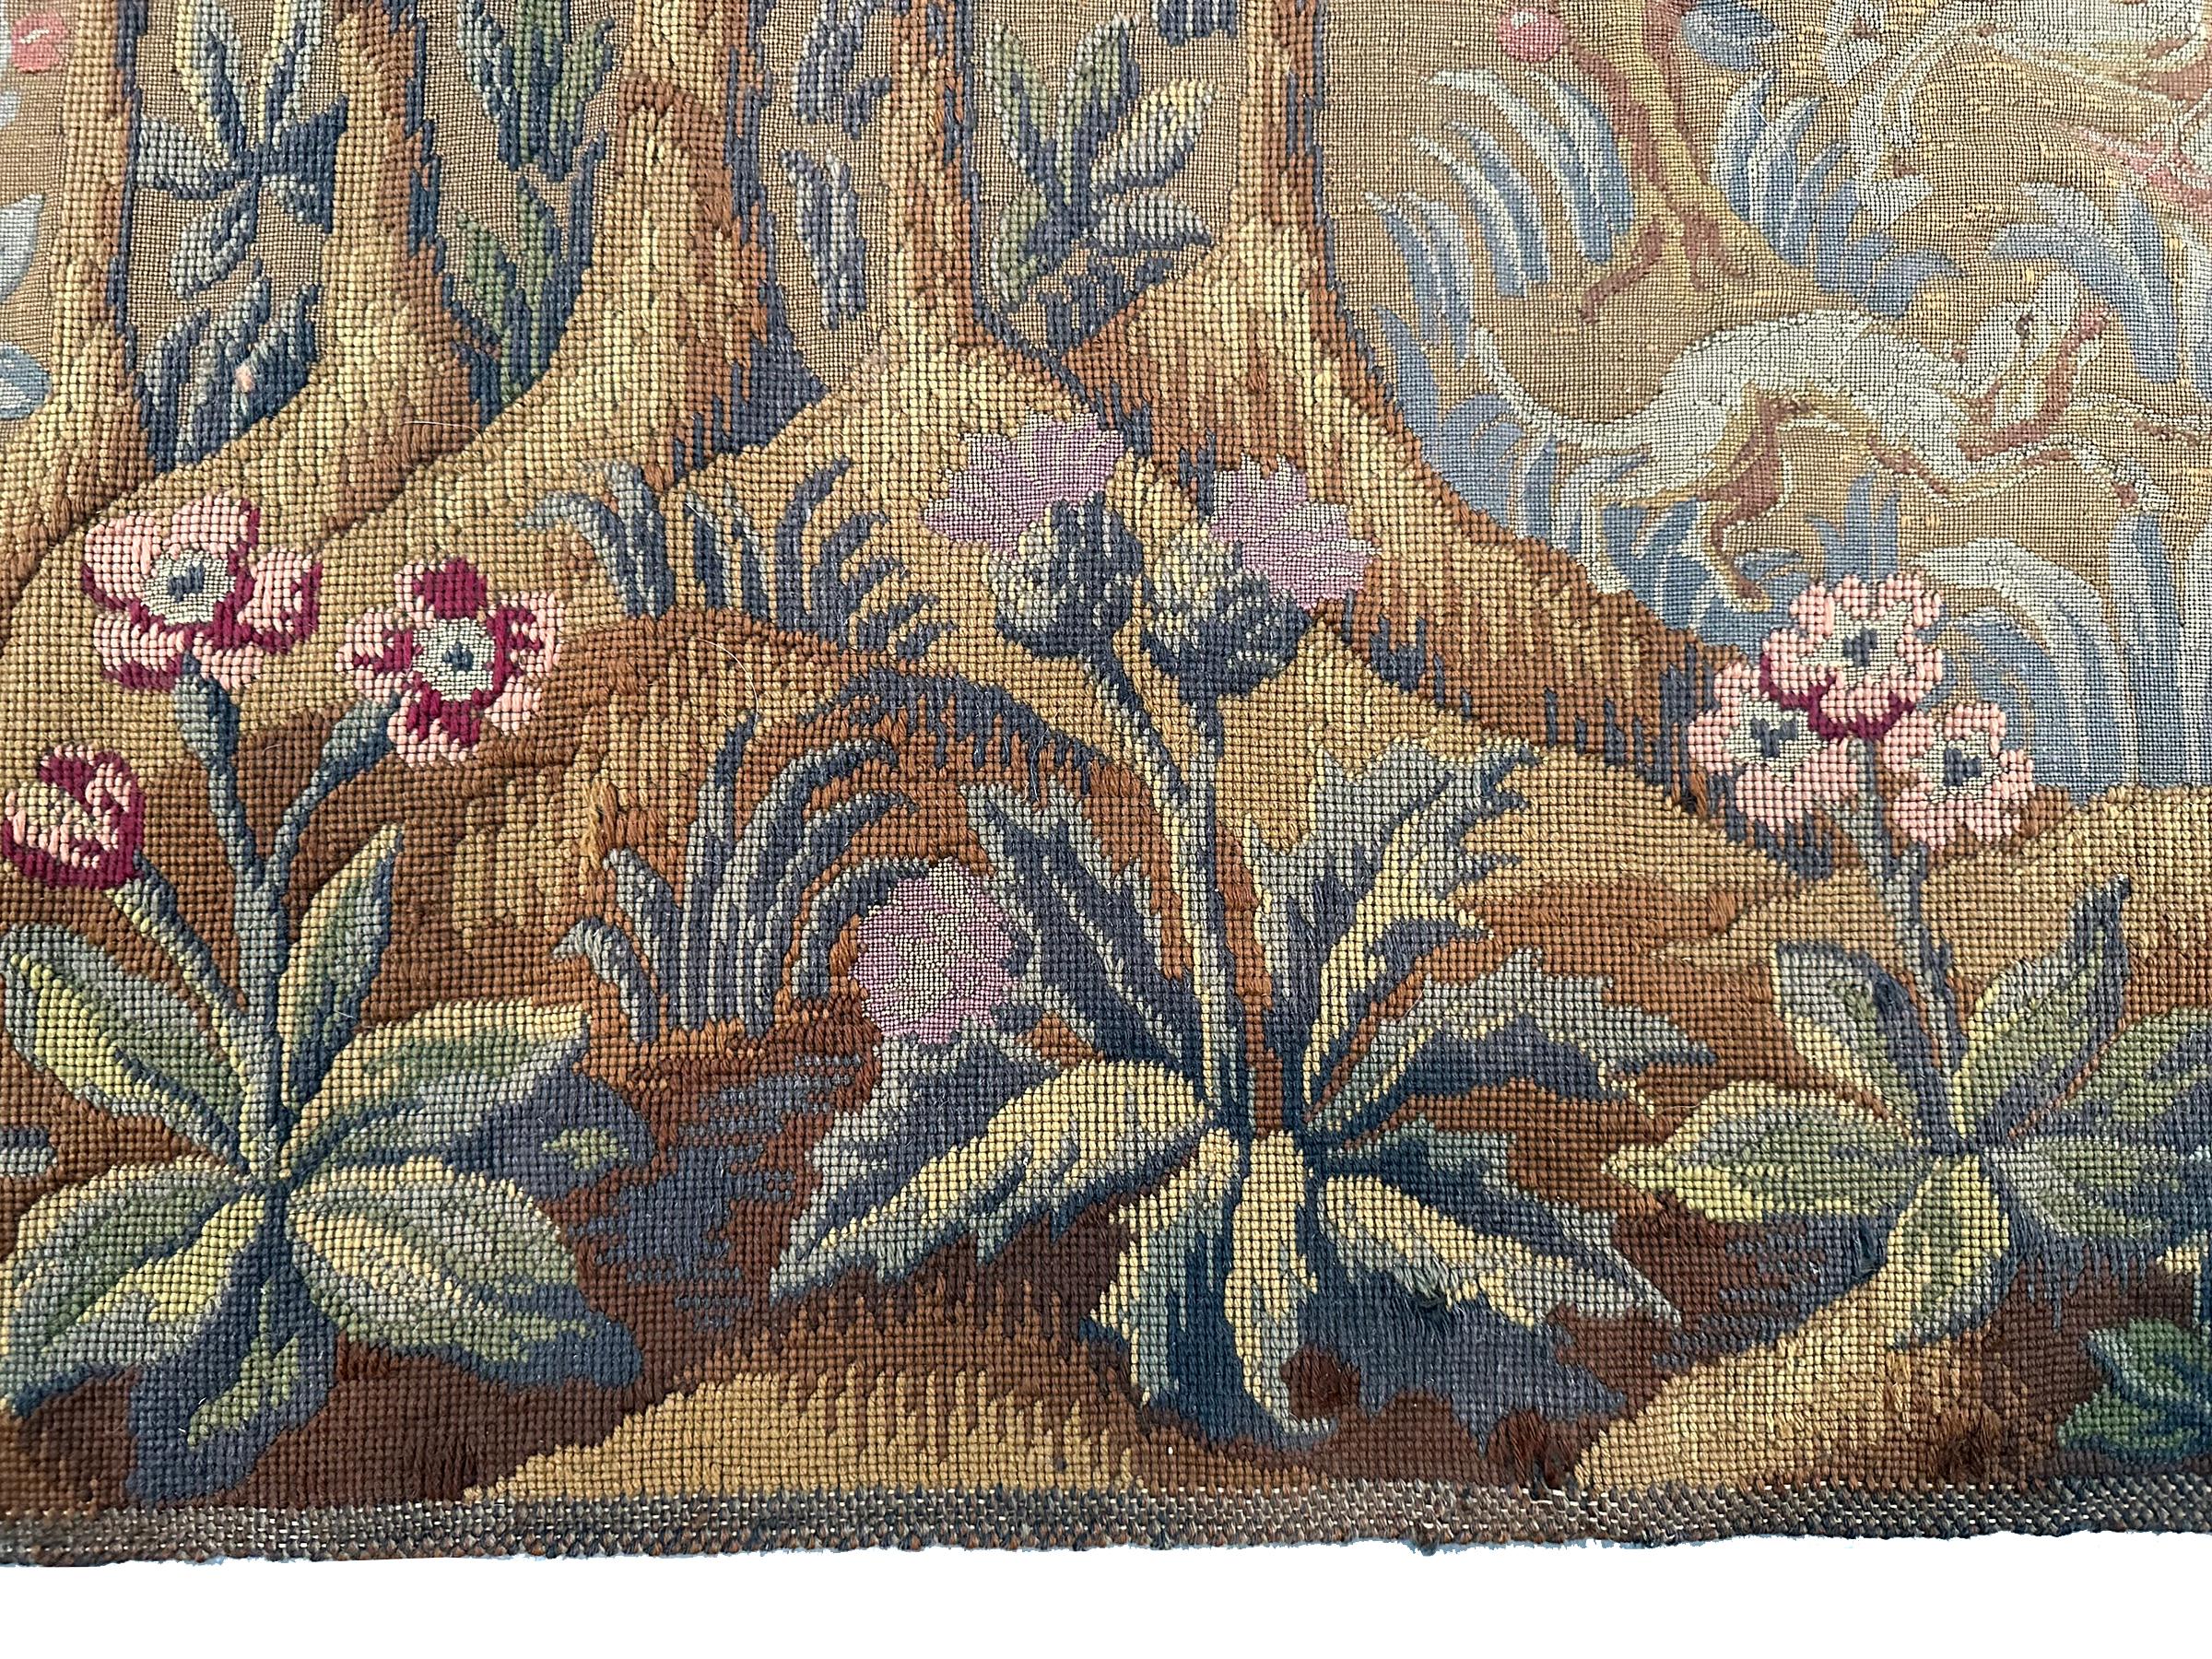 1920 Antique English Needlepoint Tapestry Wool & Silk 3x5 82cm x 158cm For Sale 1